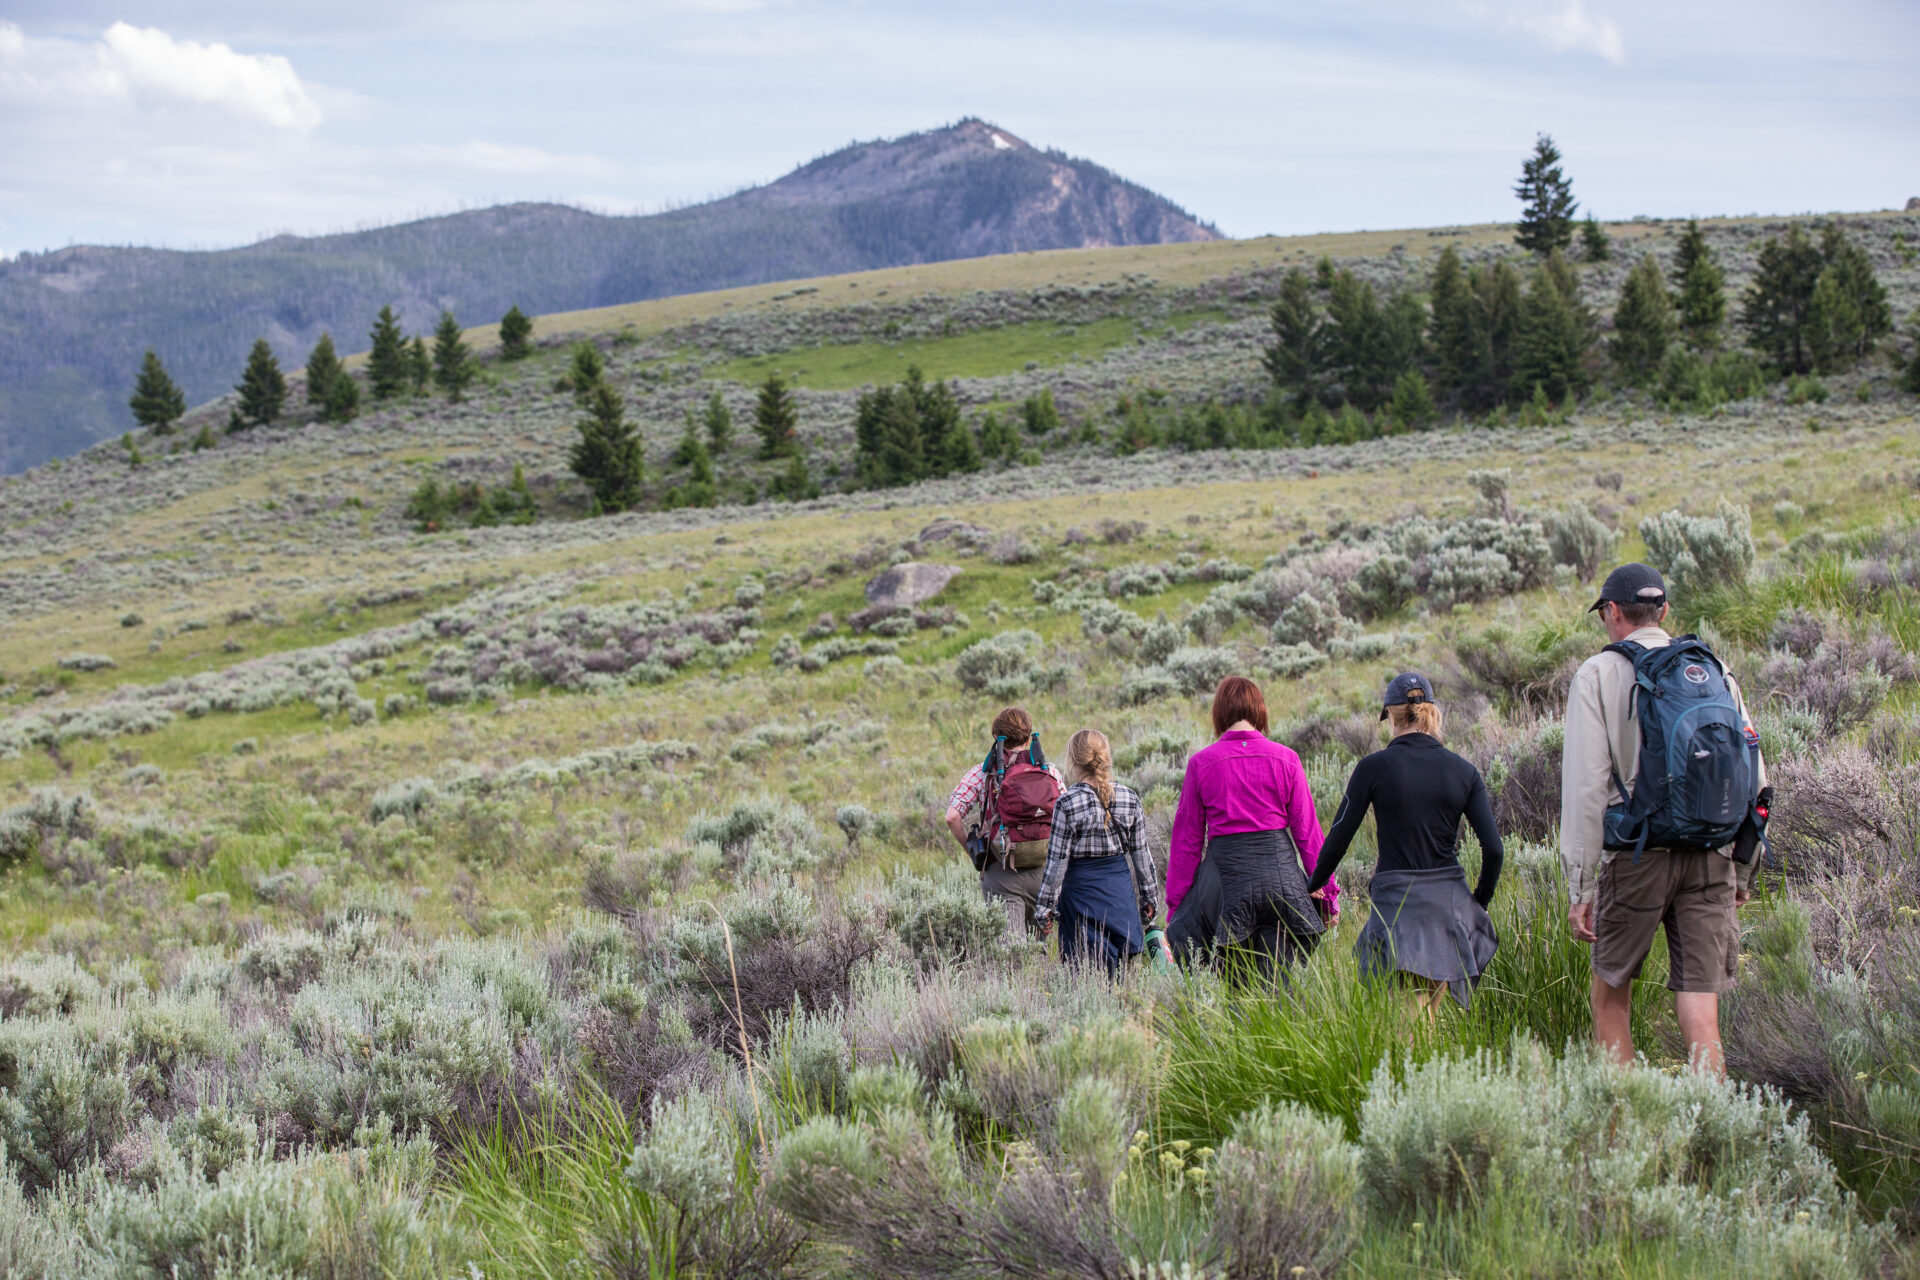 A group hiking through a meadow with a view of Bunsen Peak in the background